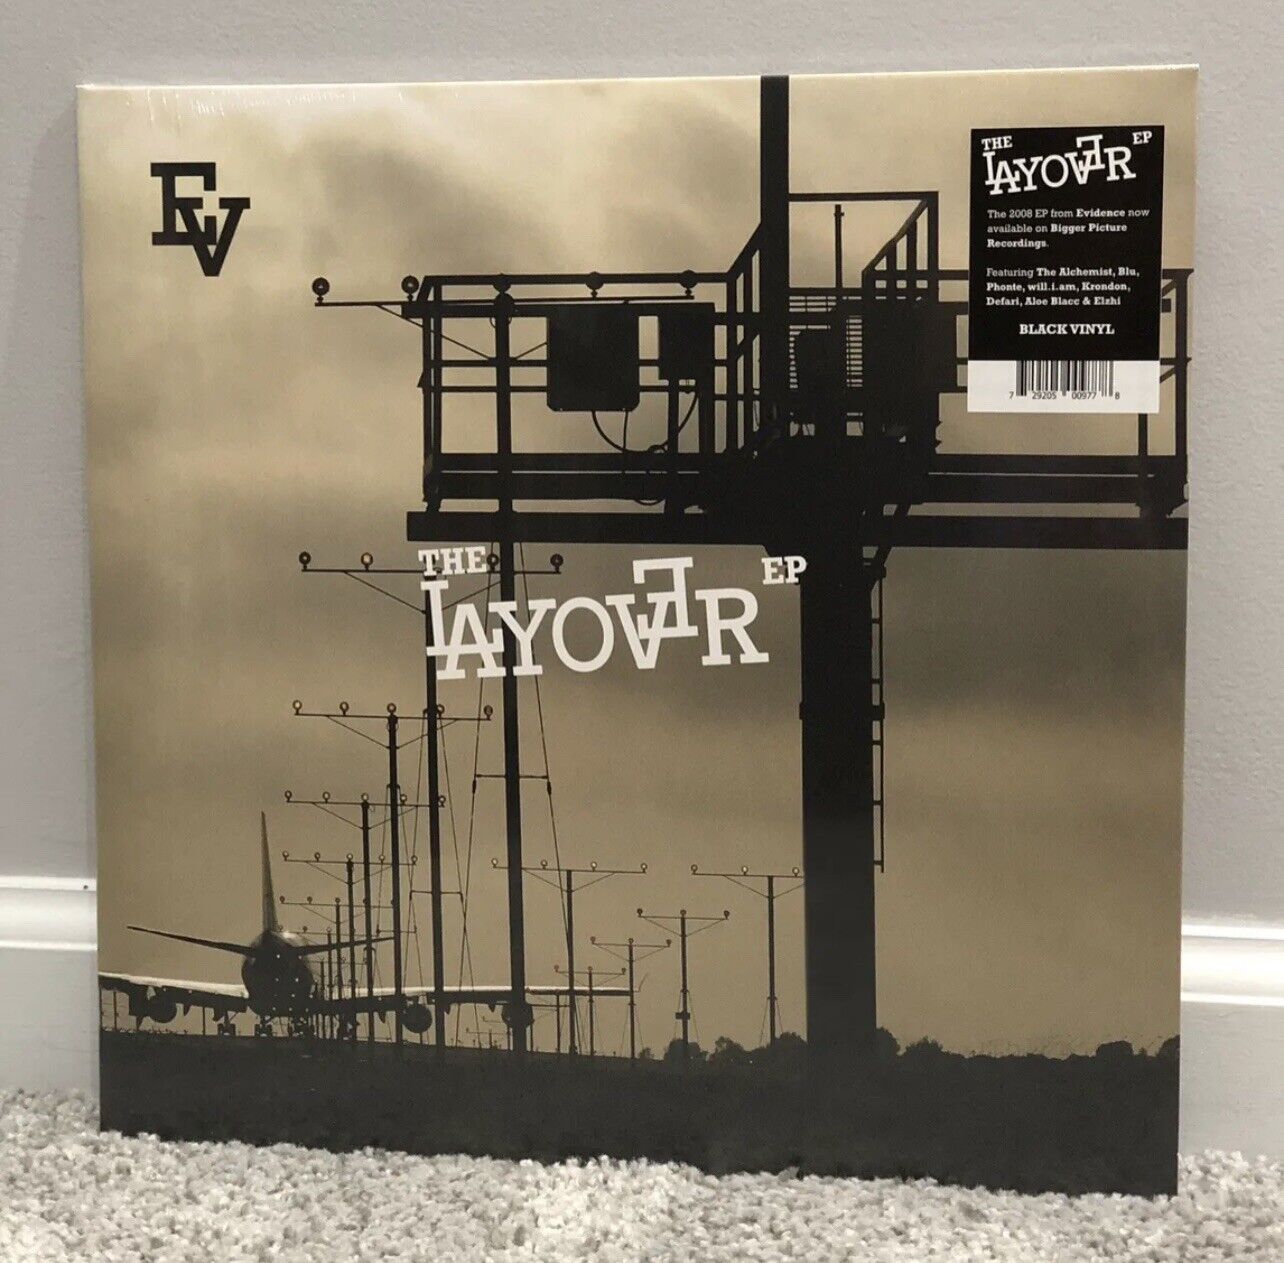 Evidence ‎The Layover EP Black Vinyl Limited Edition ALC Dilated Peoples Sealed